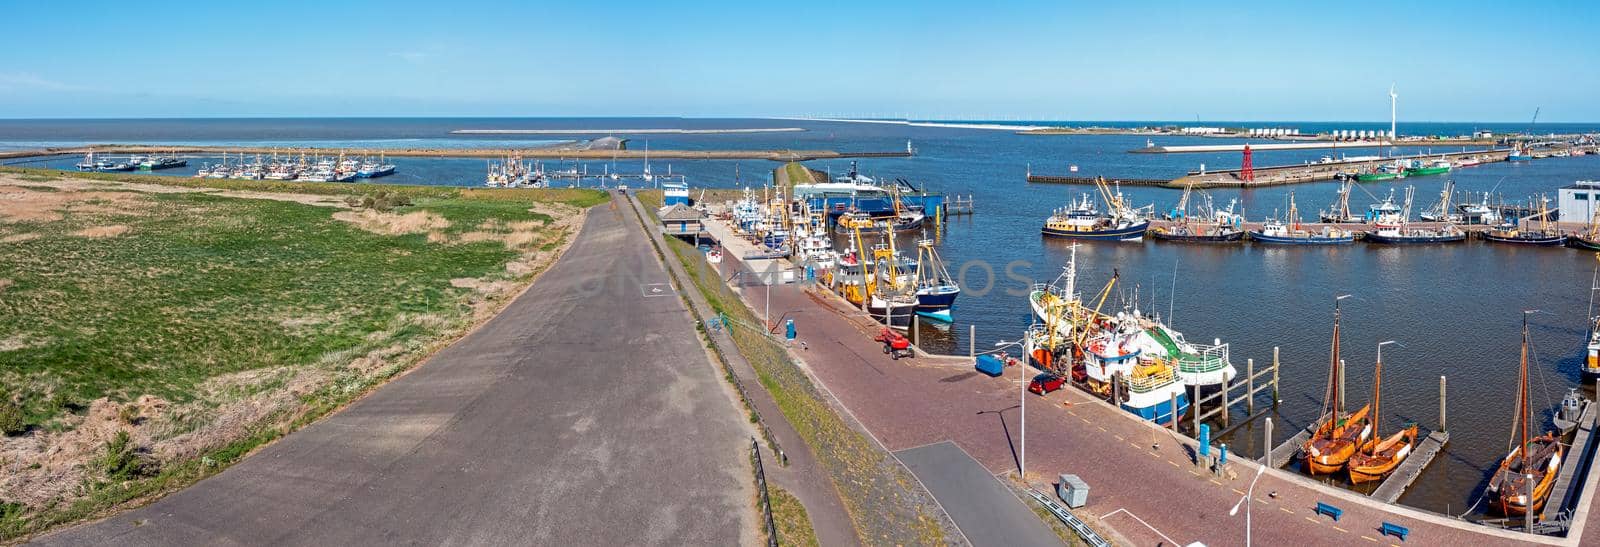 Aerial panorama from the fishing harbor in Den Oever in the Netherlands by devy